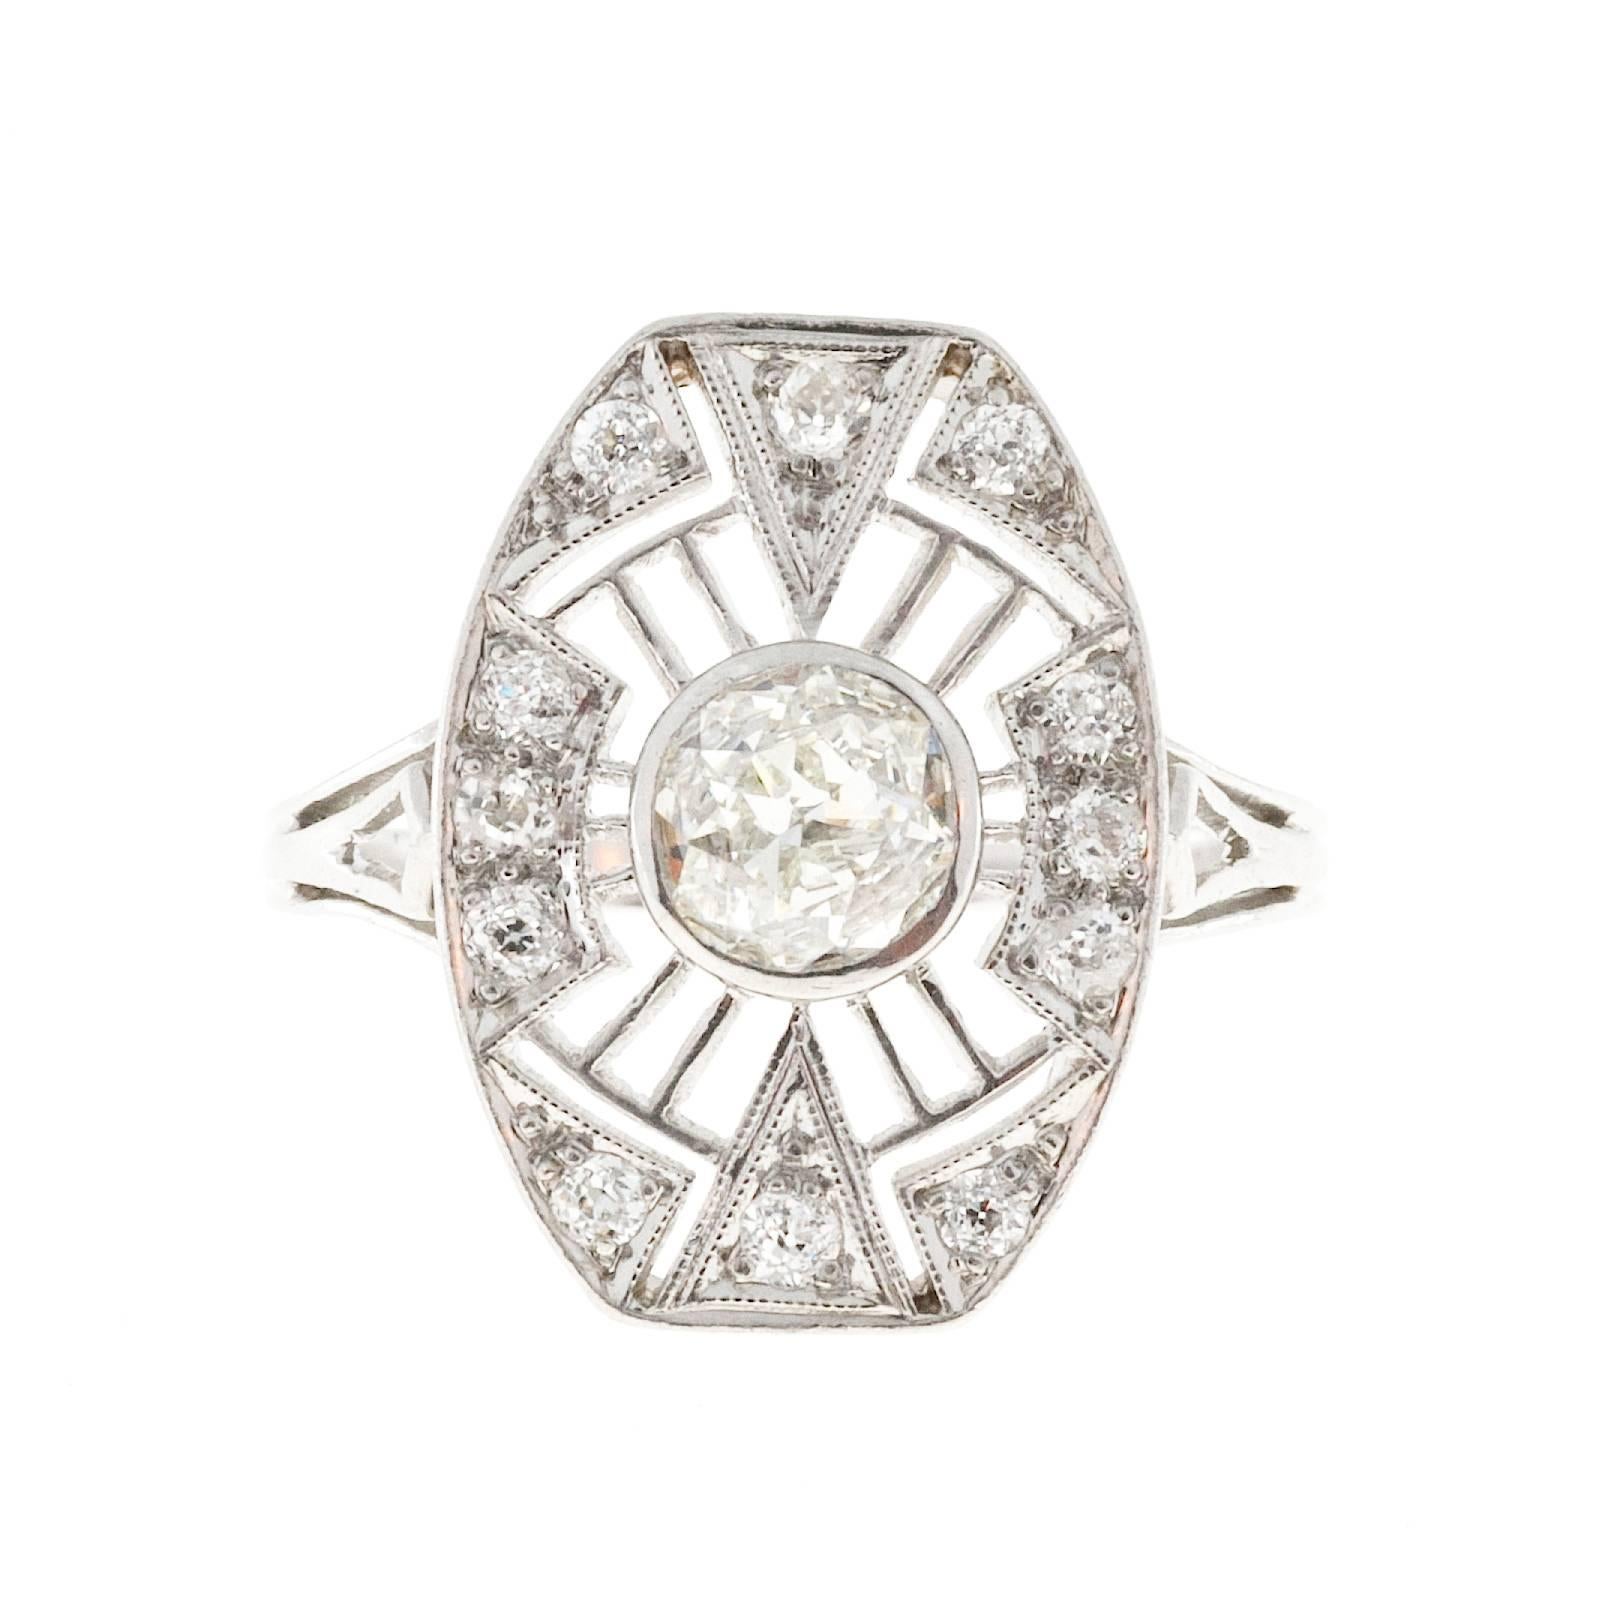 Circa 1905 Edwardian Raised crown and small table, platinum diamond ring. 

1 round brilliant cut diamond, approx. total weight .52cts, H-I, VS1, 5.50 x 5.45 x 2.55mm, Depth: 46.5%, Table: 51%, 
12 brilliant cut diamonds, approx. total weight